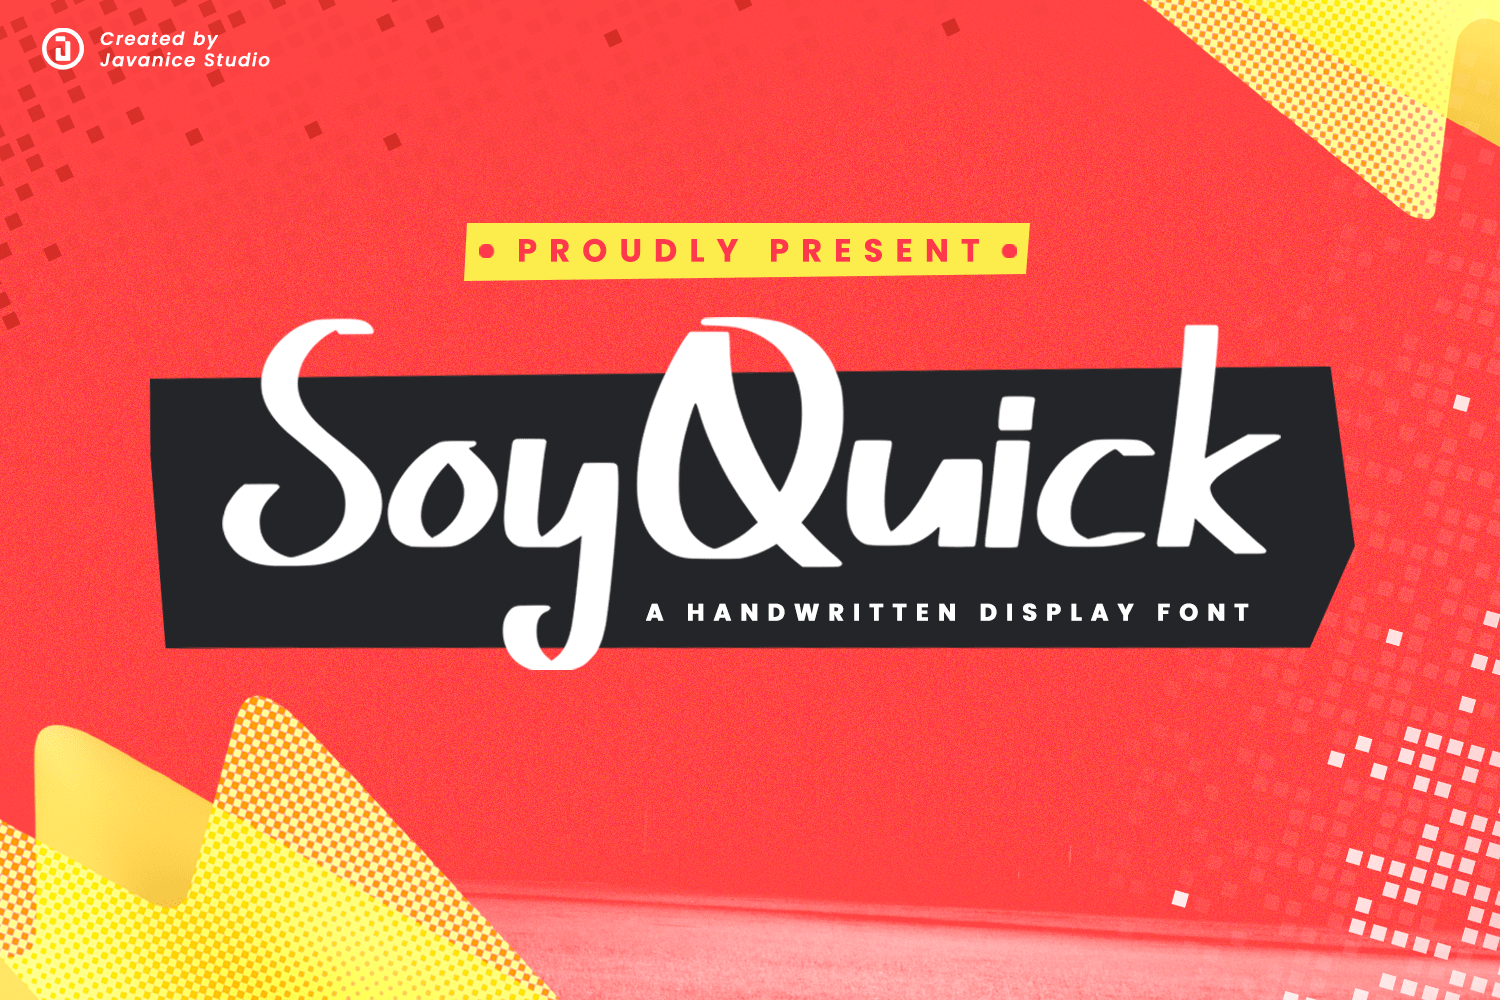 SoyQuick